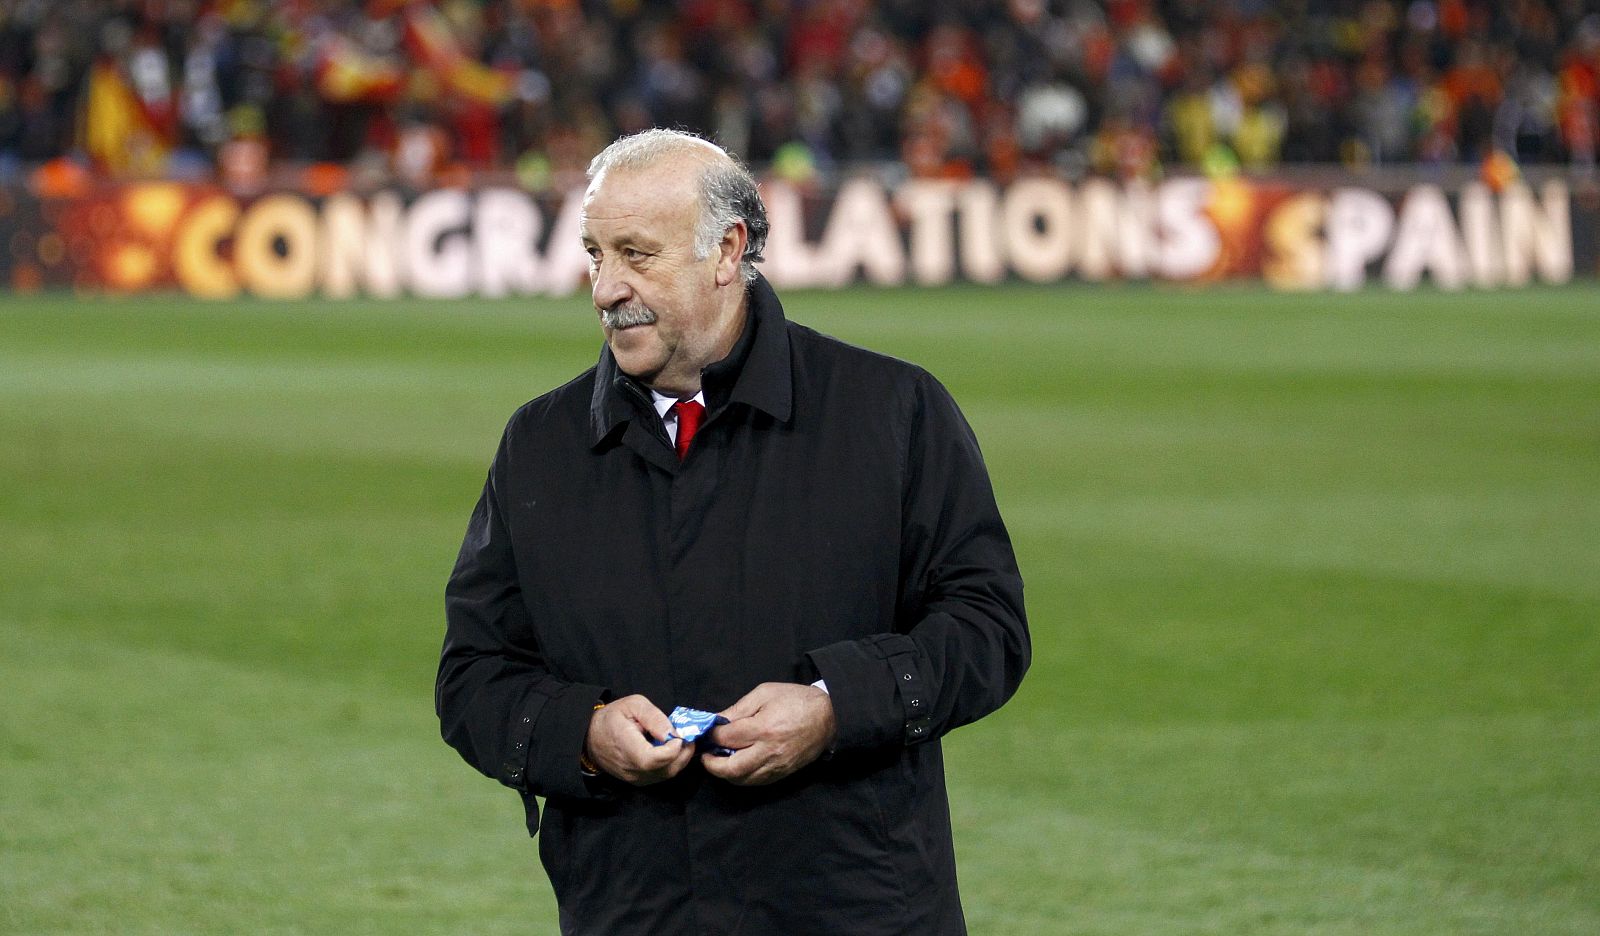 Spain's coach Vicente del Bosque stands on the pitch after their 2010 World Cup final soccer match against Netherlands at Soccer City stadium